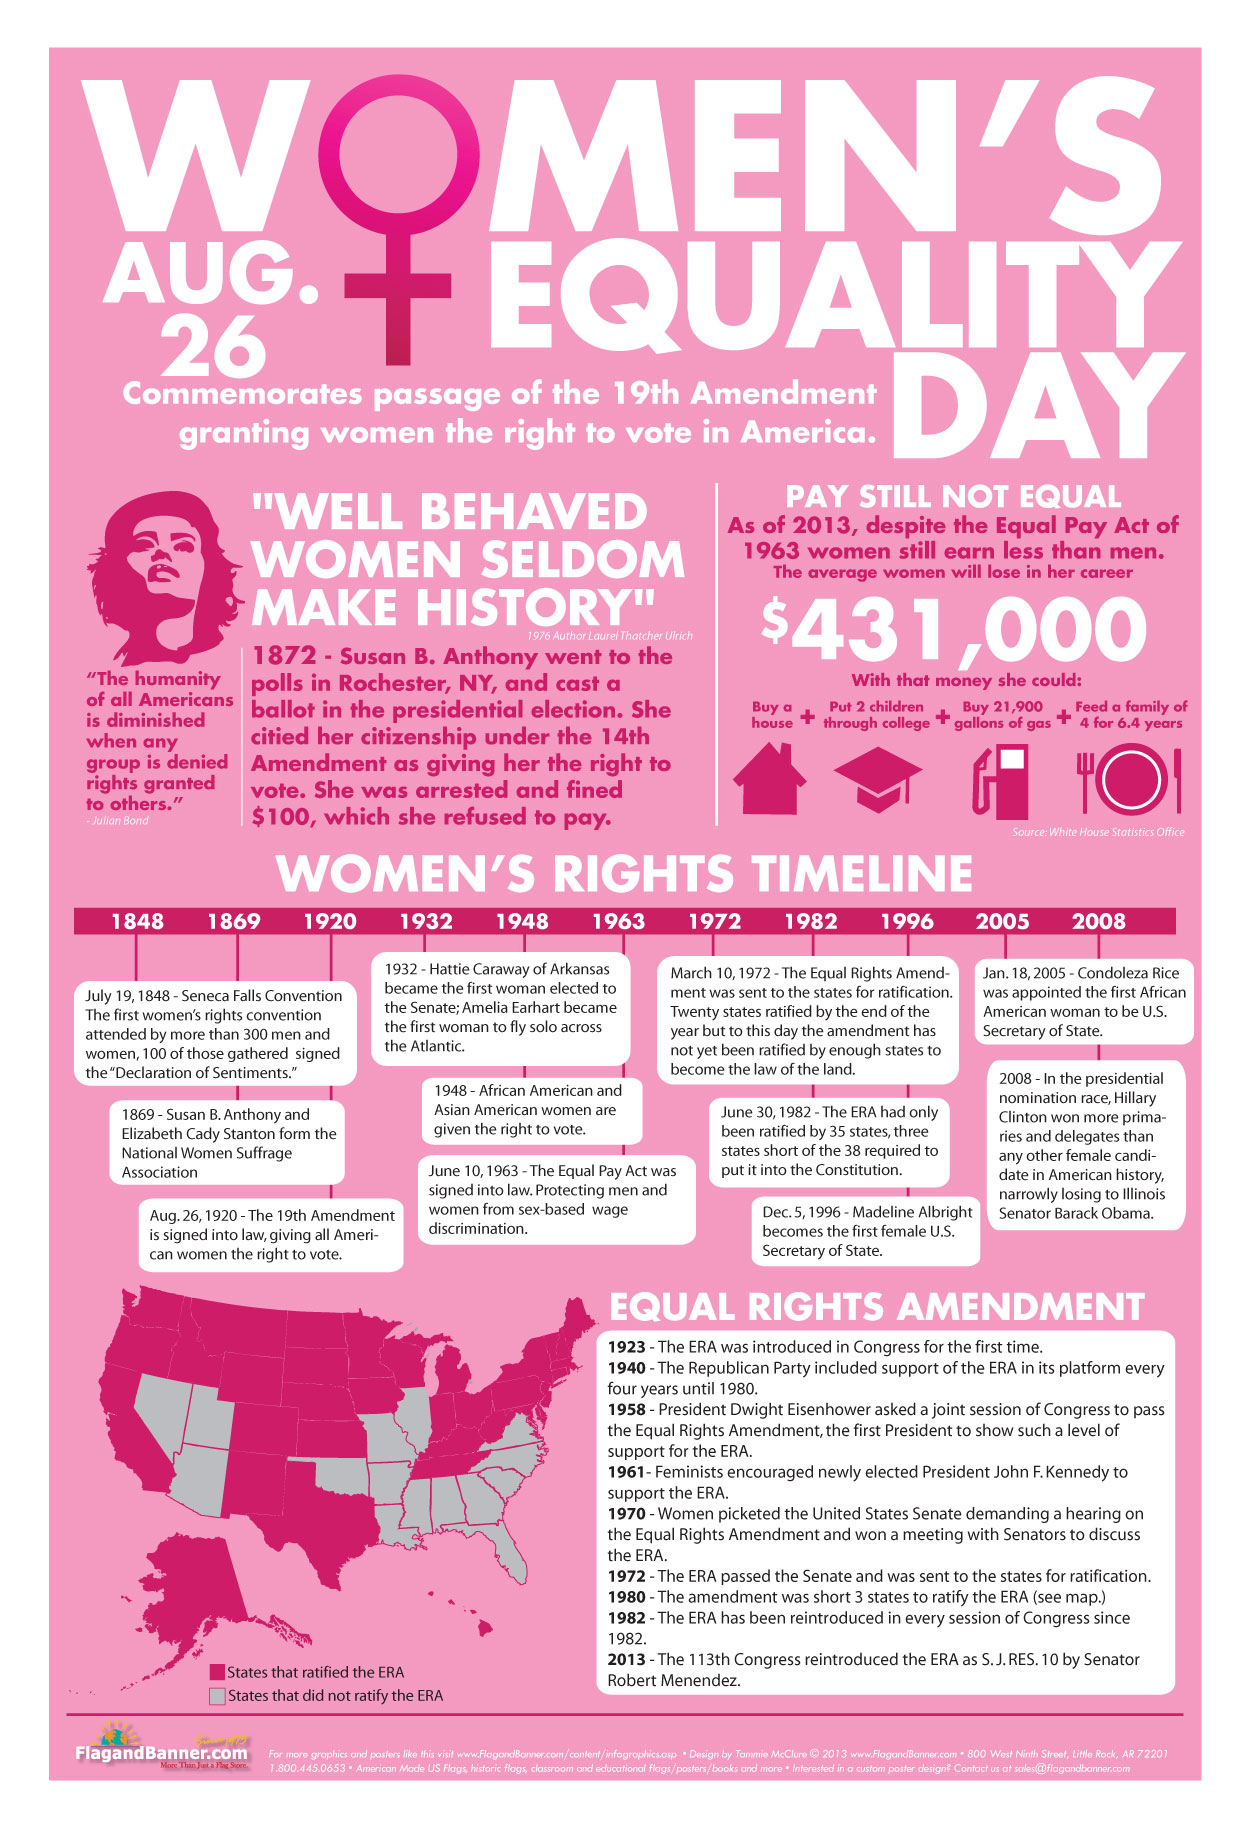 Women’s Equality Day August 26th Poster Image